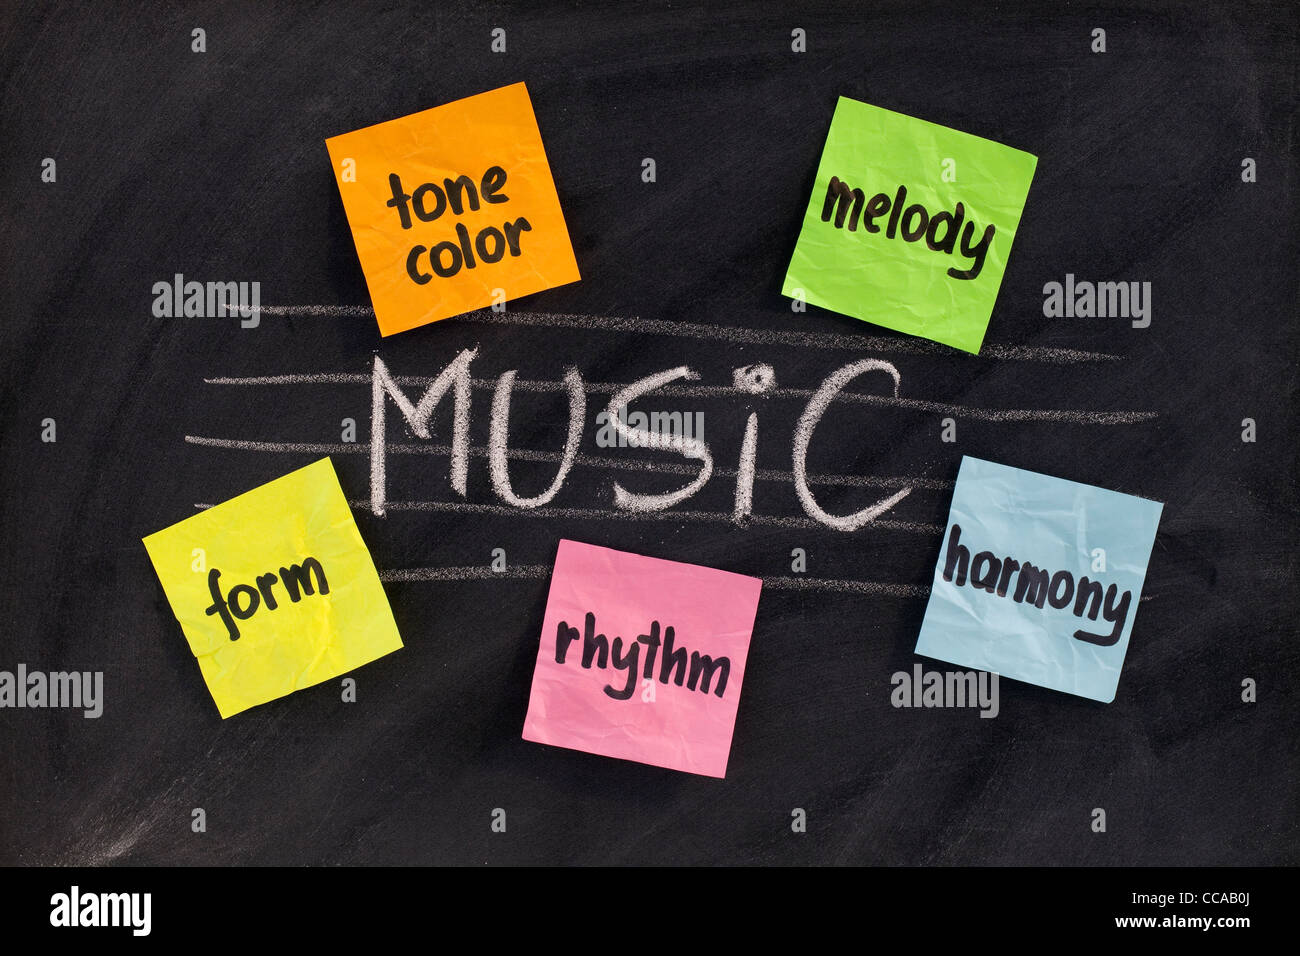 traditional musicological or European-influenced aspects of classical music (harmony, melody, form, rhythm and tone color) Stock Photo